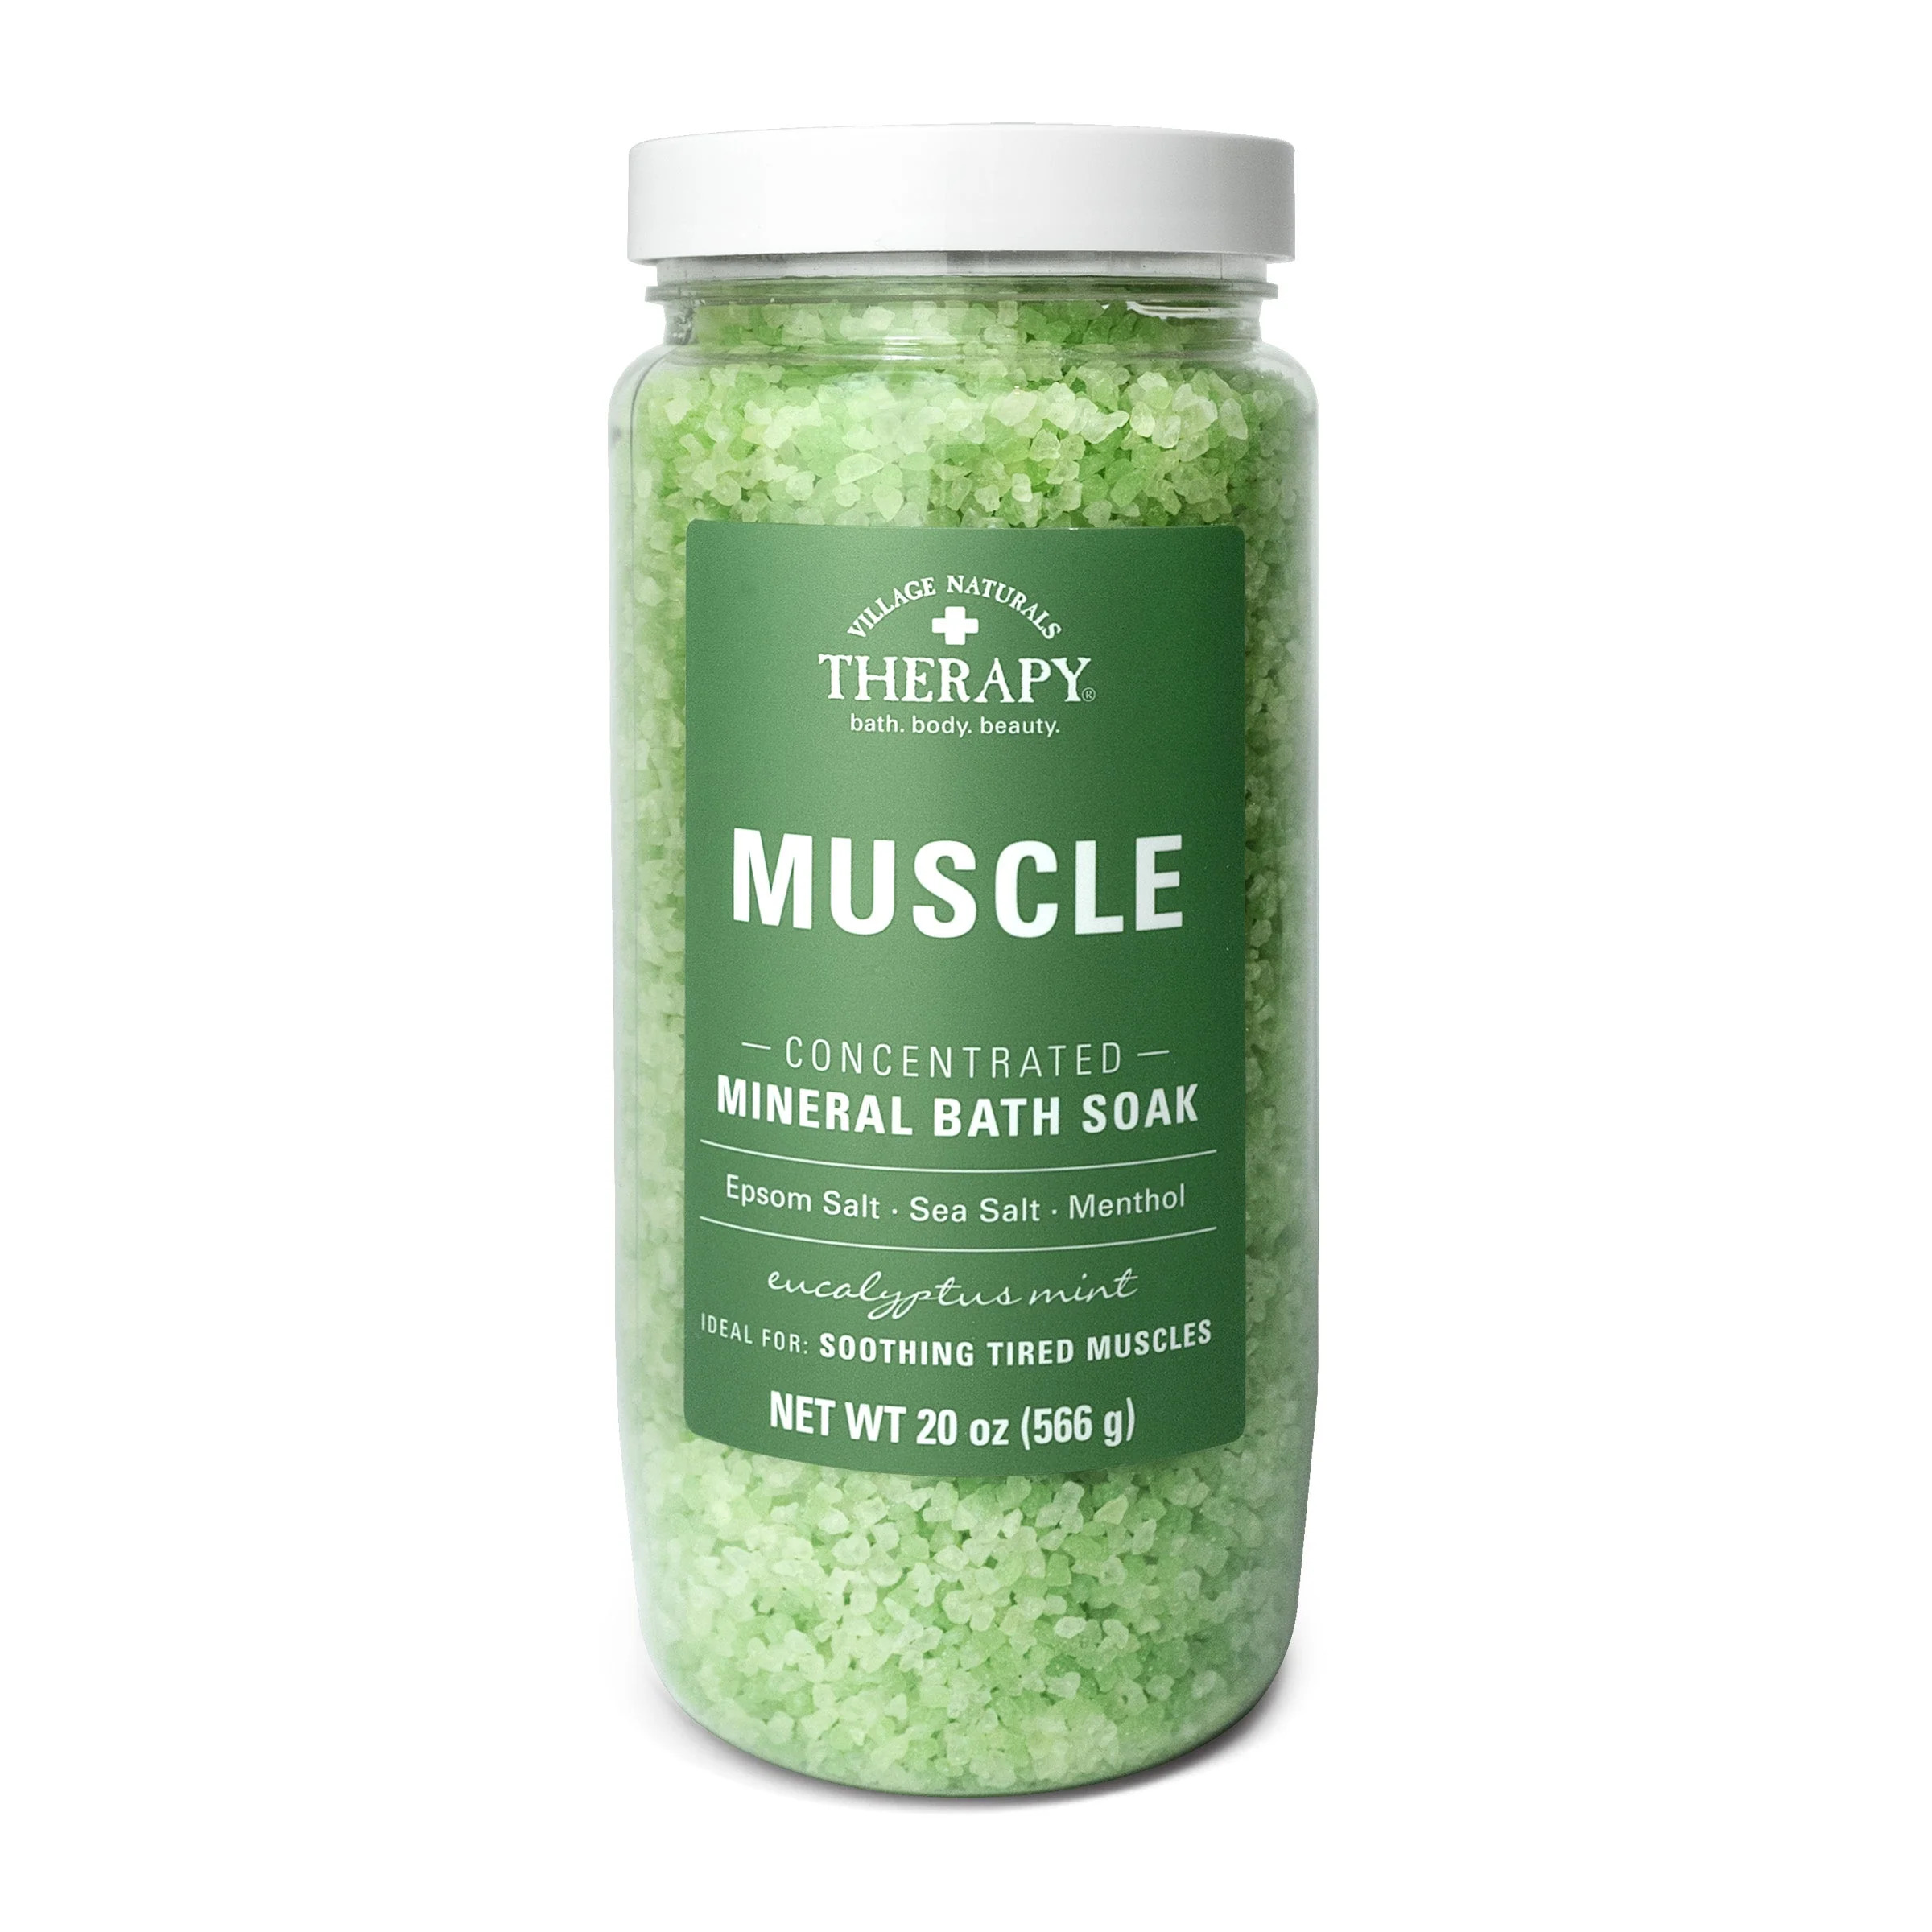 Village Naturals Therapy Muscle Relief Concentrated Mineral Bath Soak, Eucalyptus Mint, 20 oz - image 1 of 13